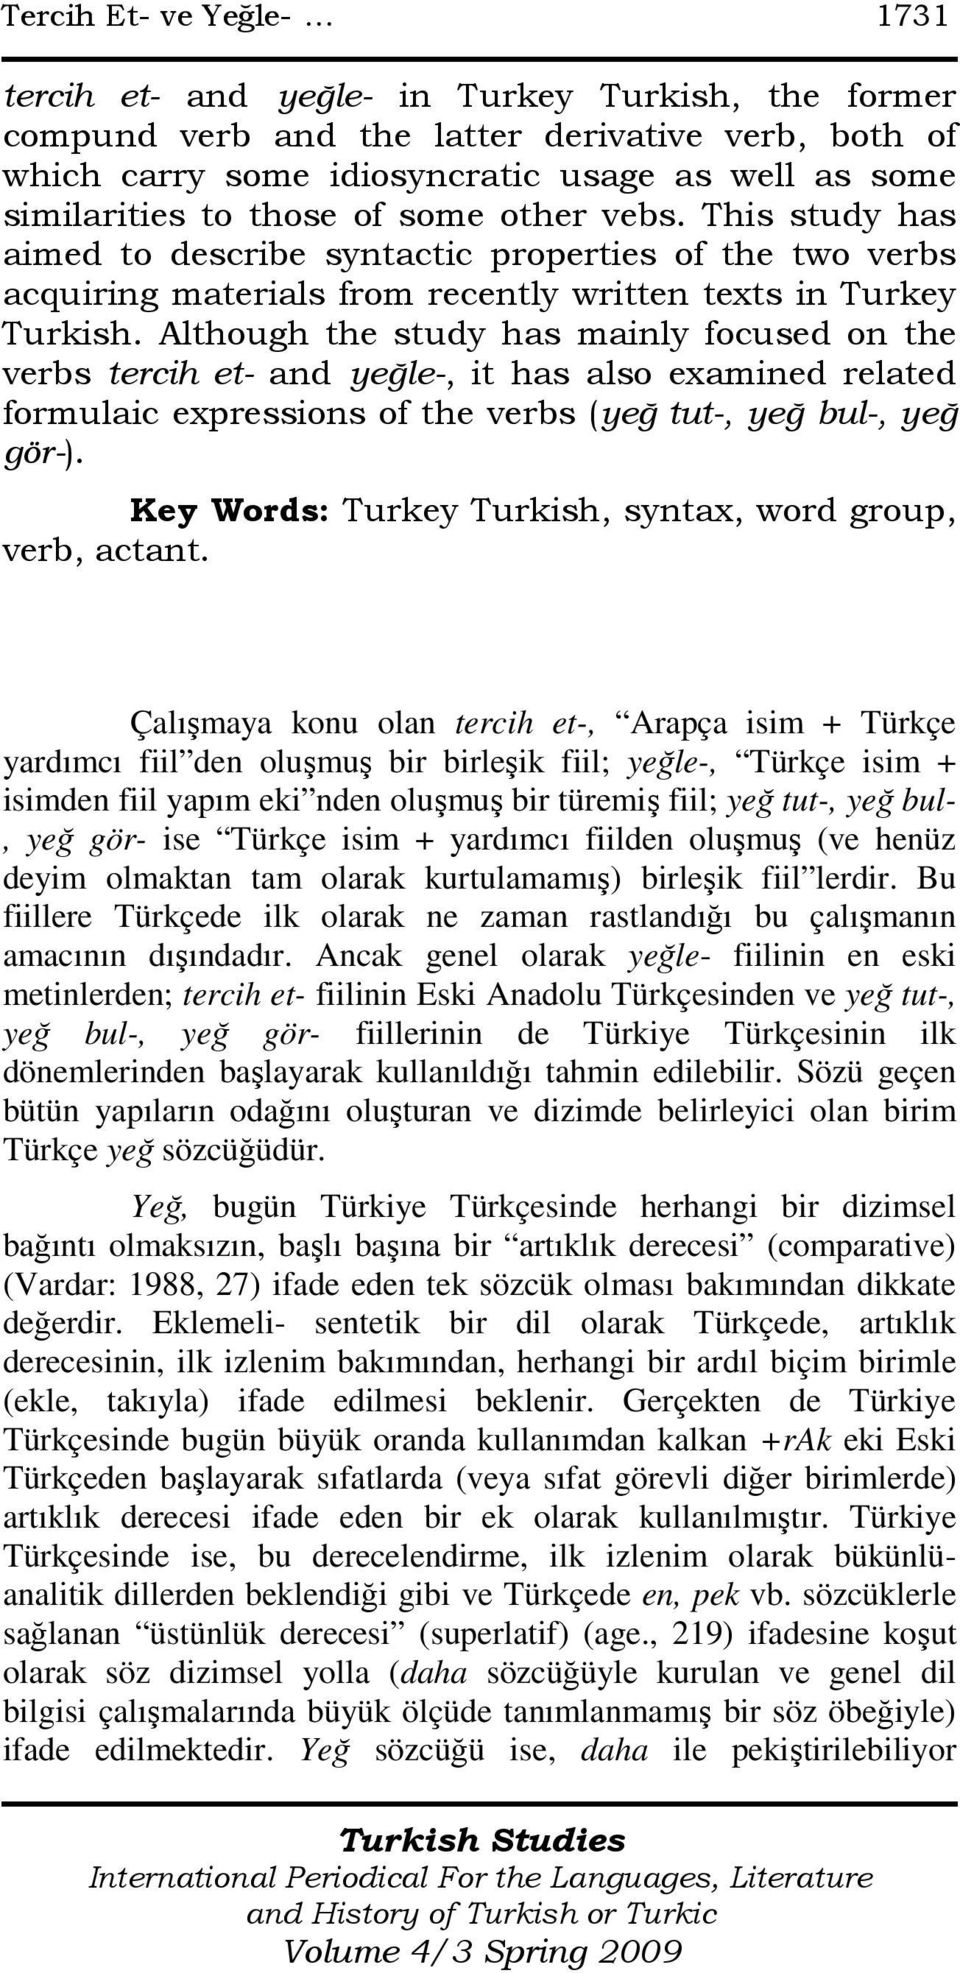 Although the study has mainly focused on the verbs tercih et- and yeğle-, it has also examined related formulaic expressions of the verbs (yeğ tut-, yeğ bul-, yeğ gör-).